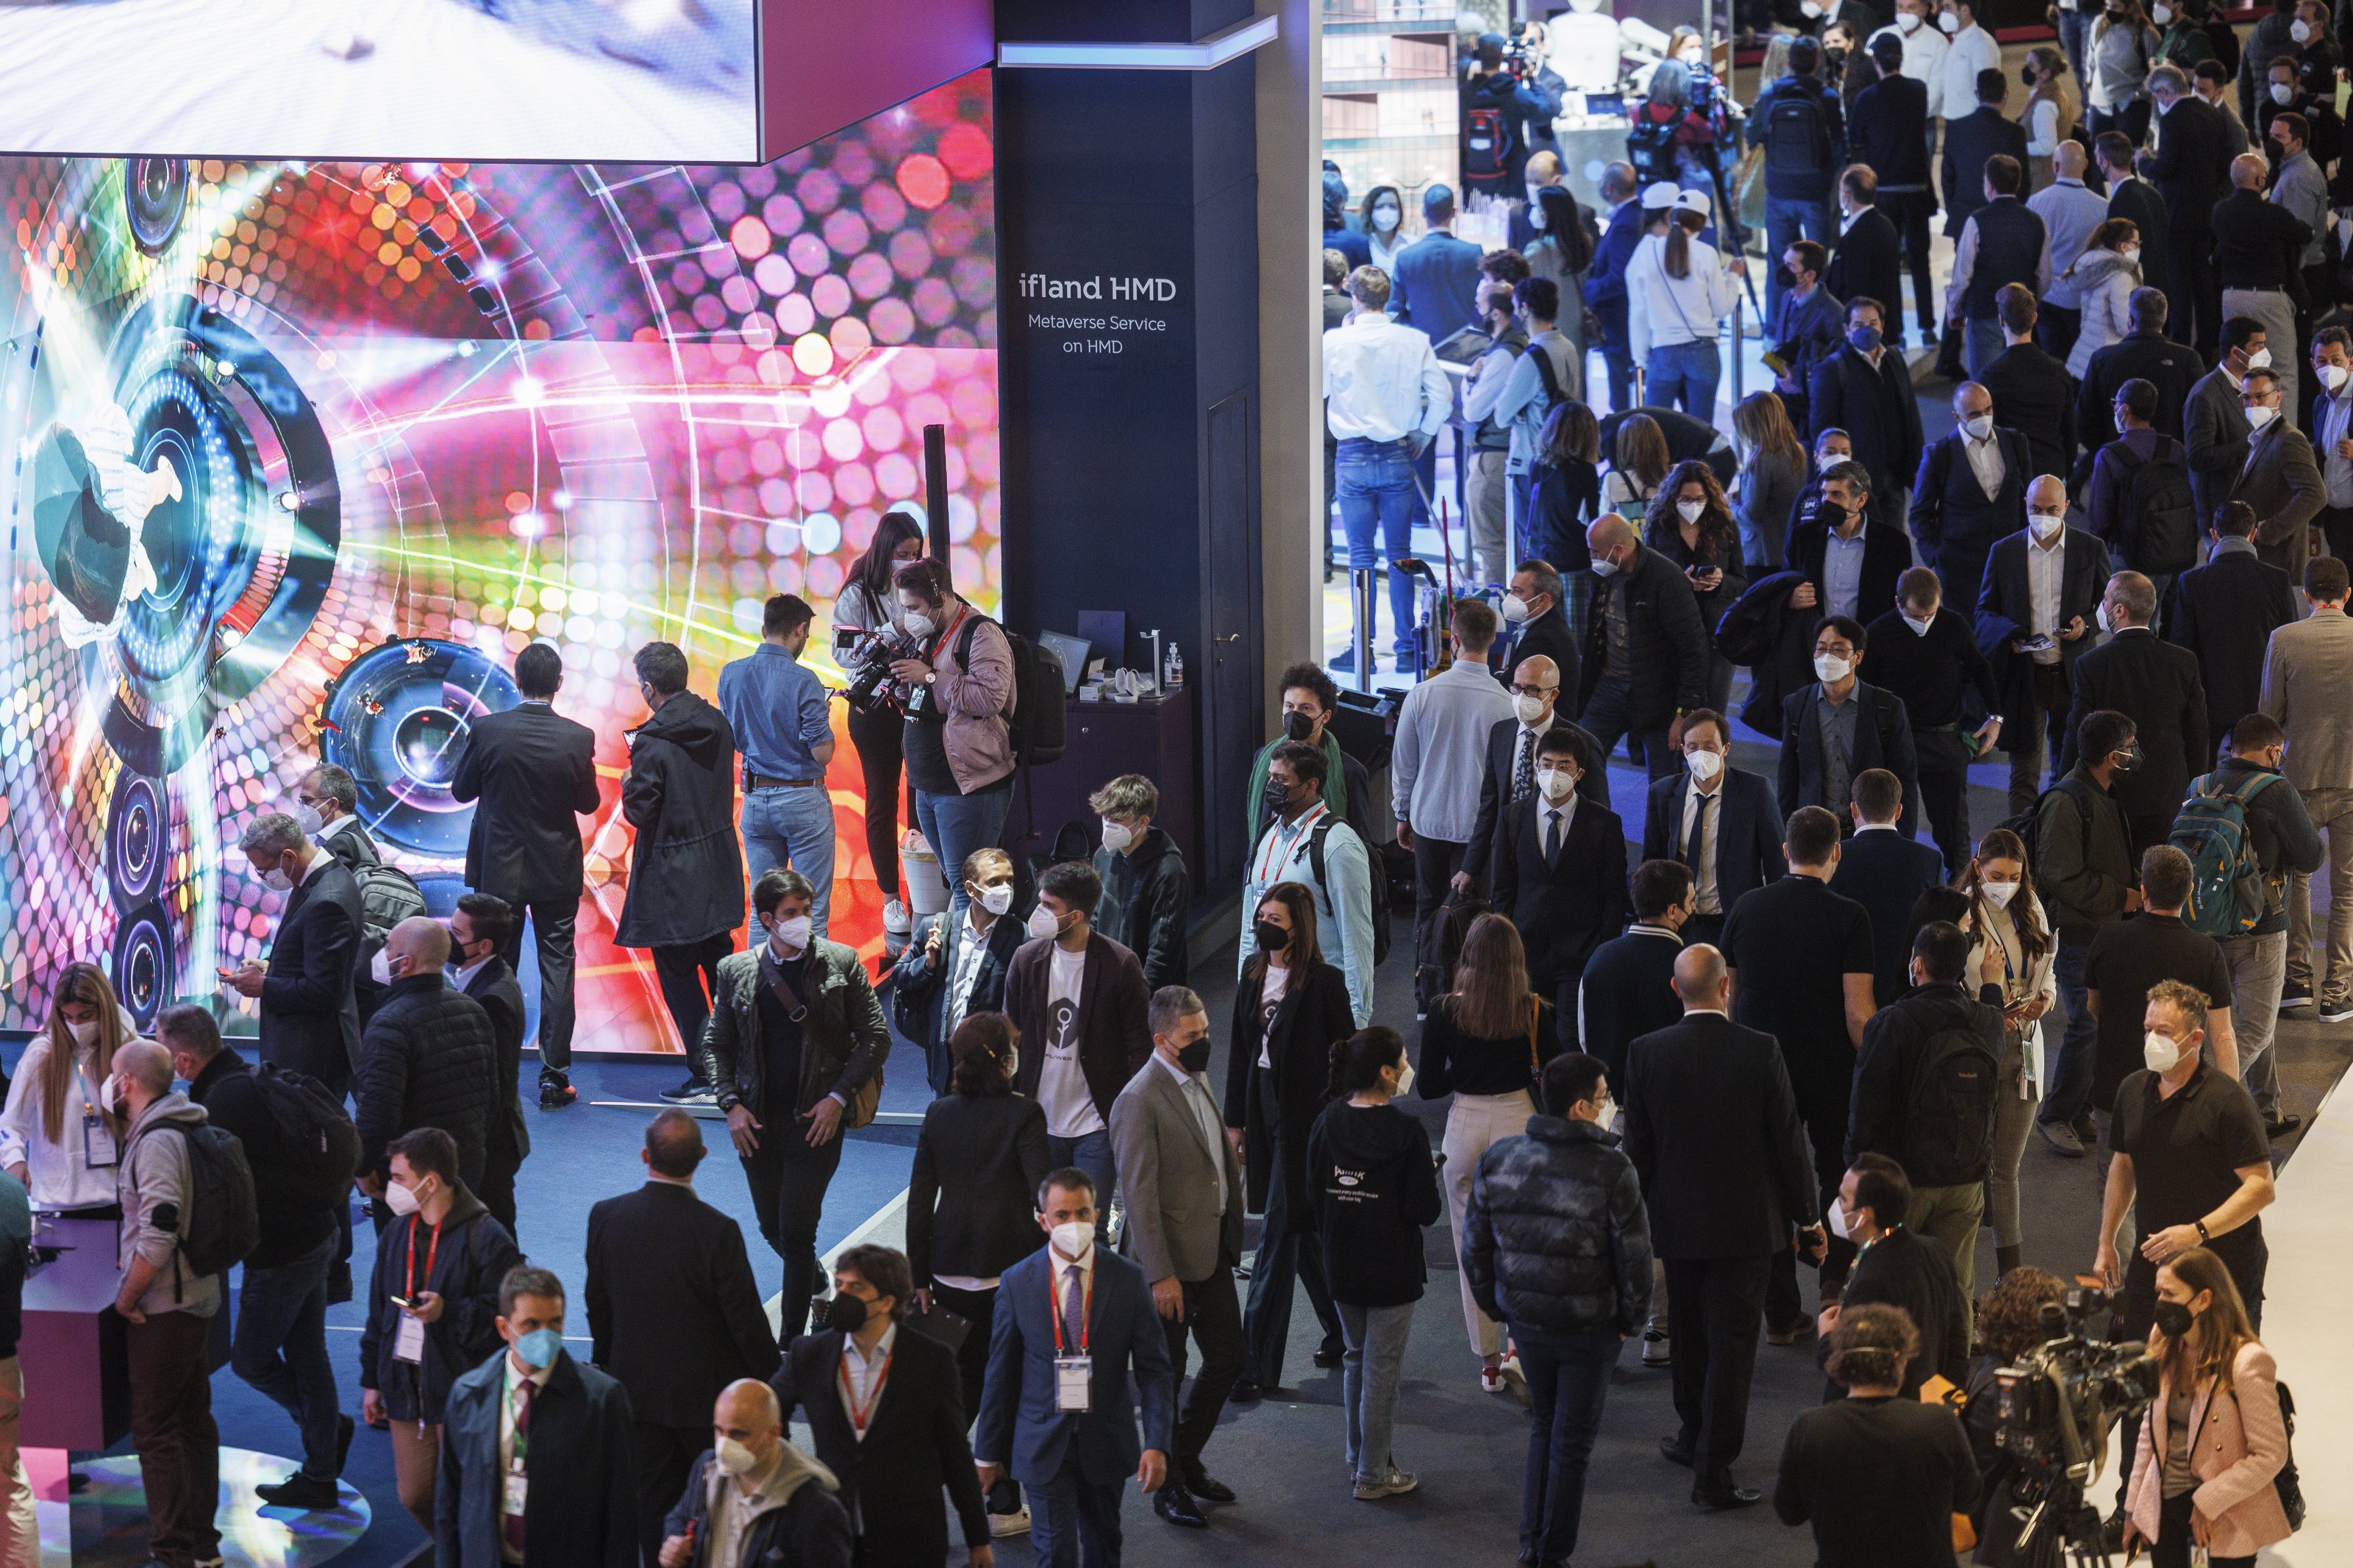 Mobile World Congress to stay in Barcelona until 2030